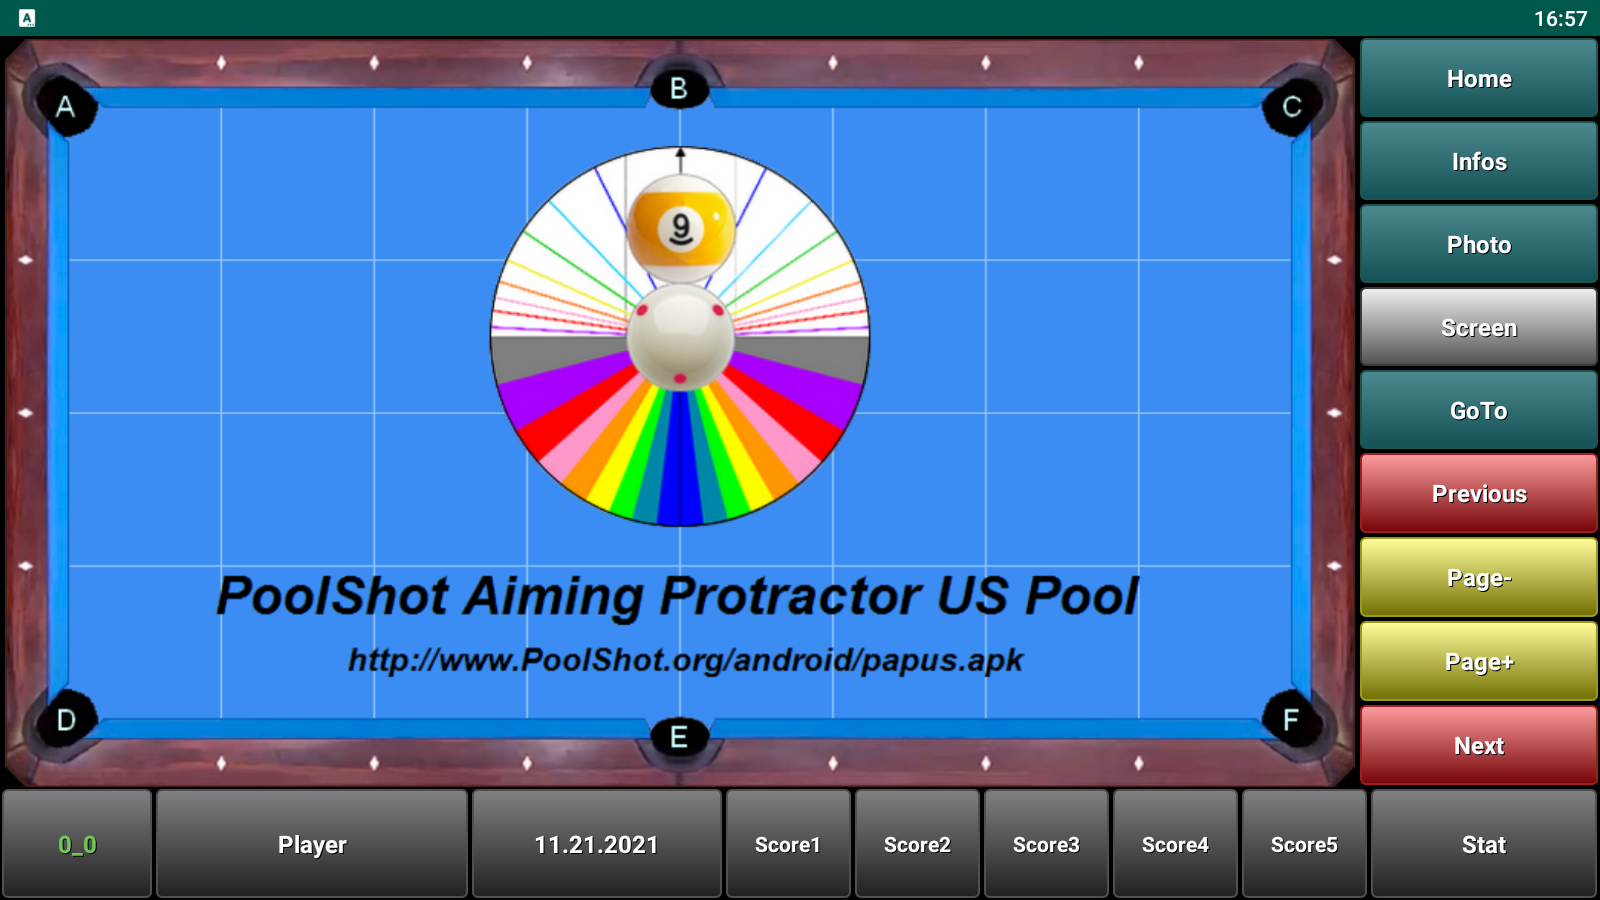 Download PoolShot Aiming Protractor US Pool Android App